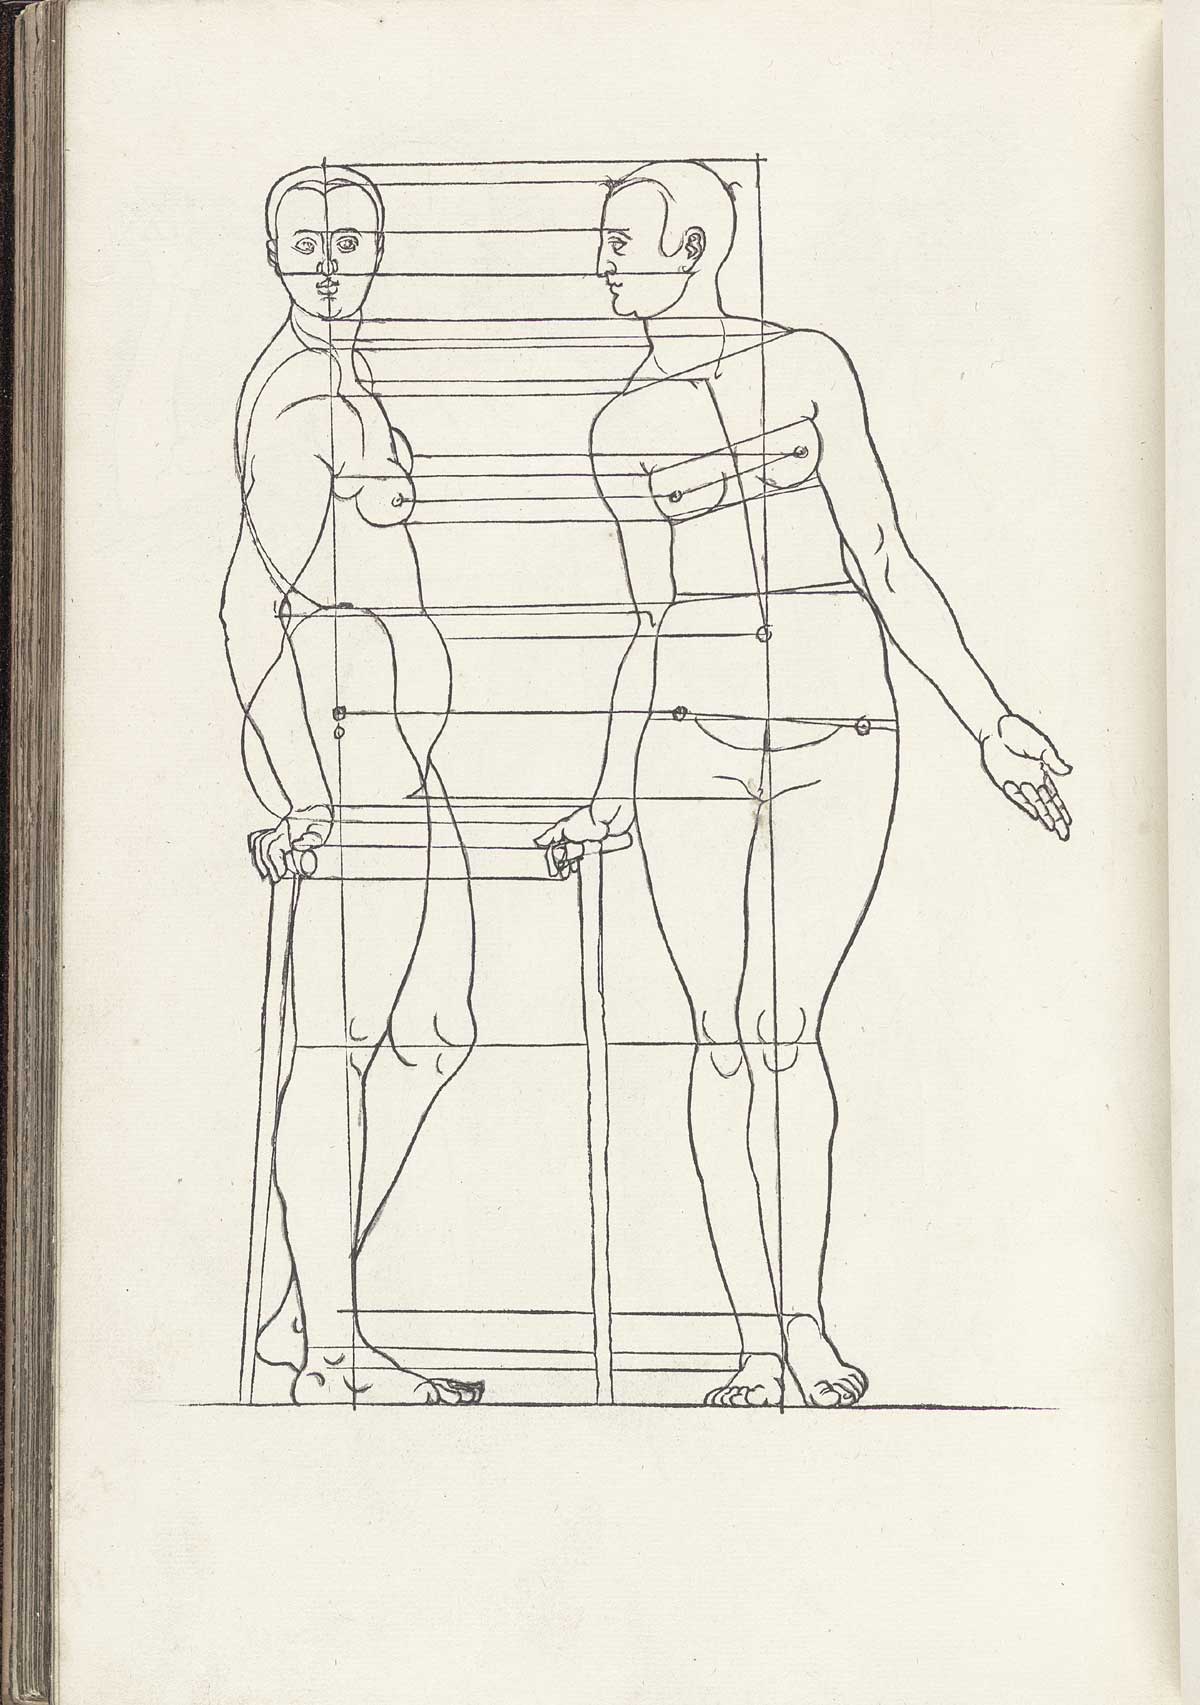 Woodcut image of two thin standing nude female figures each holding a cane in the right hand, the one on the right with her body facing the viewer but looking to the left and the one on the left standing in profile but facing the viewer, both with horizontal lines cutting across the figures showing proportions, for instance from the bottom of the chin to the top of the shoulder, from Albrecht Dürer’s Vier Bücher von menschlicher Proportion, NLM Call no. WZ 240 D853v 1528.